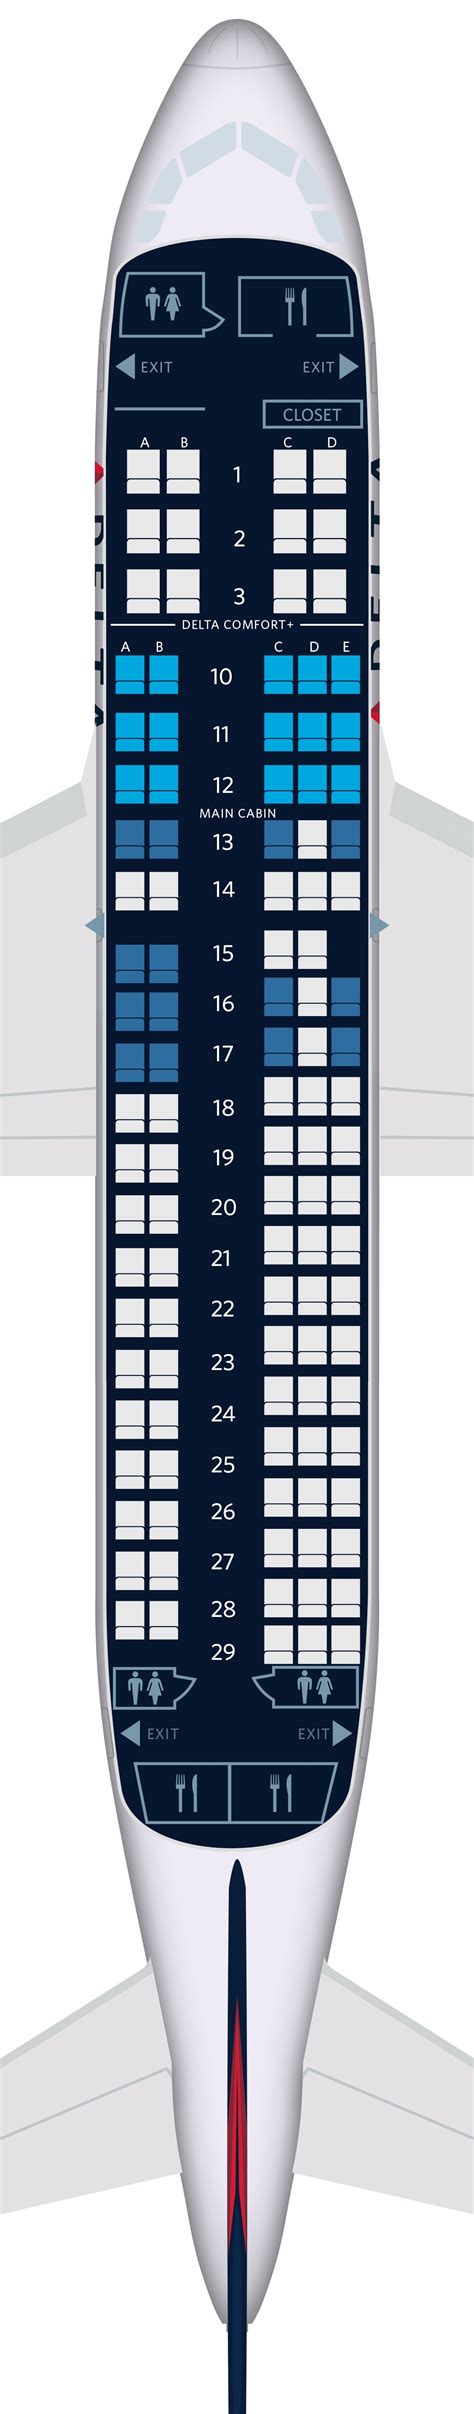 14 Seat Map Airbus A320 100